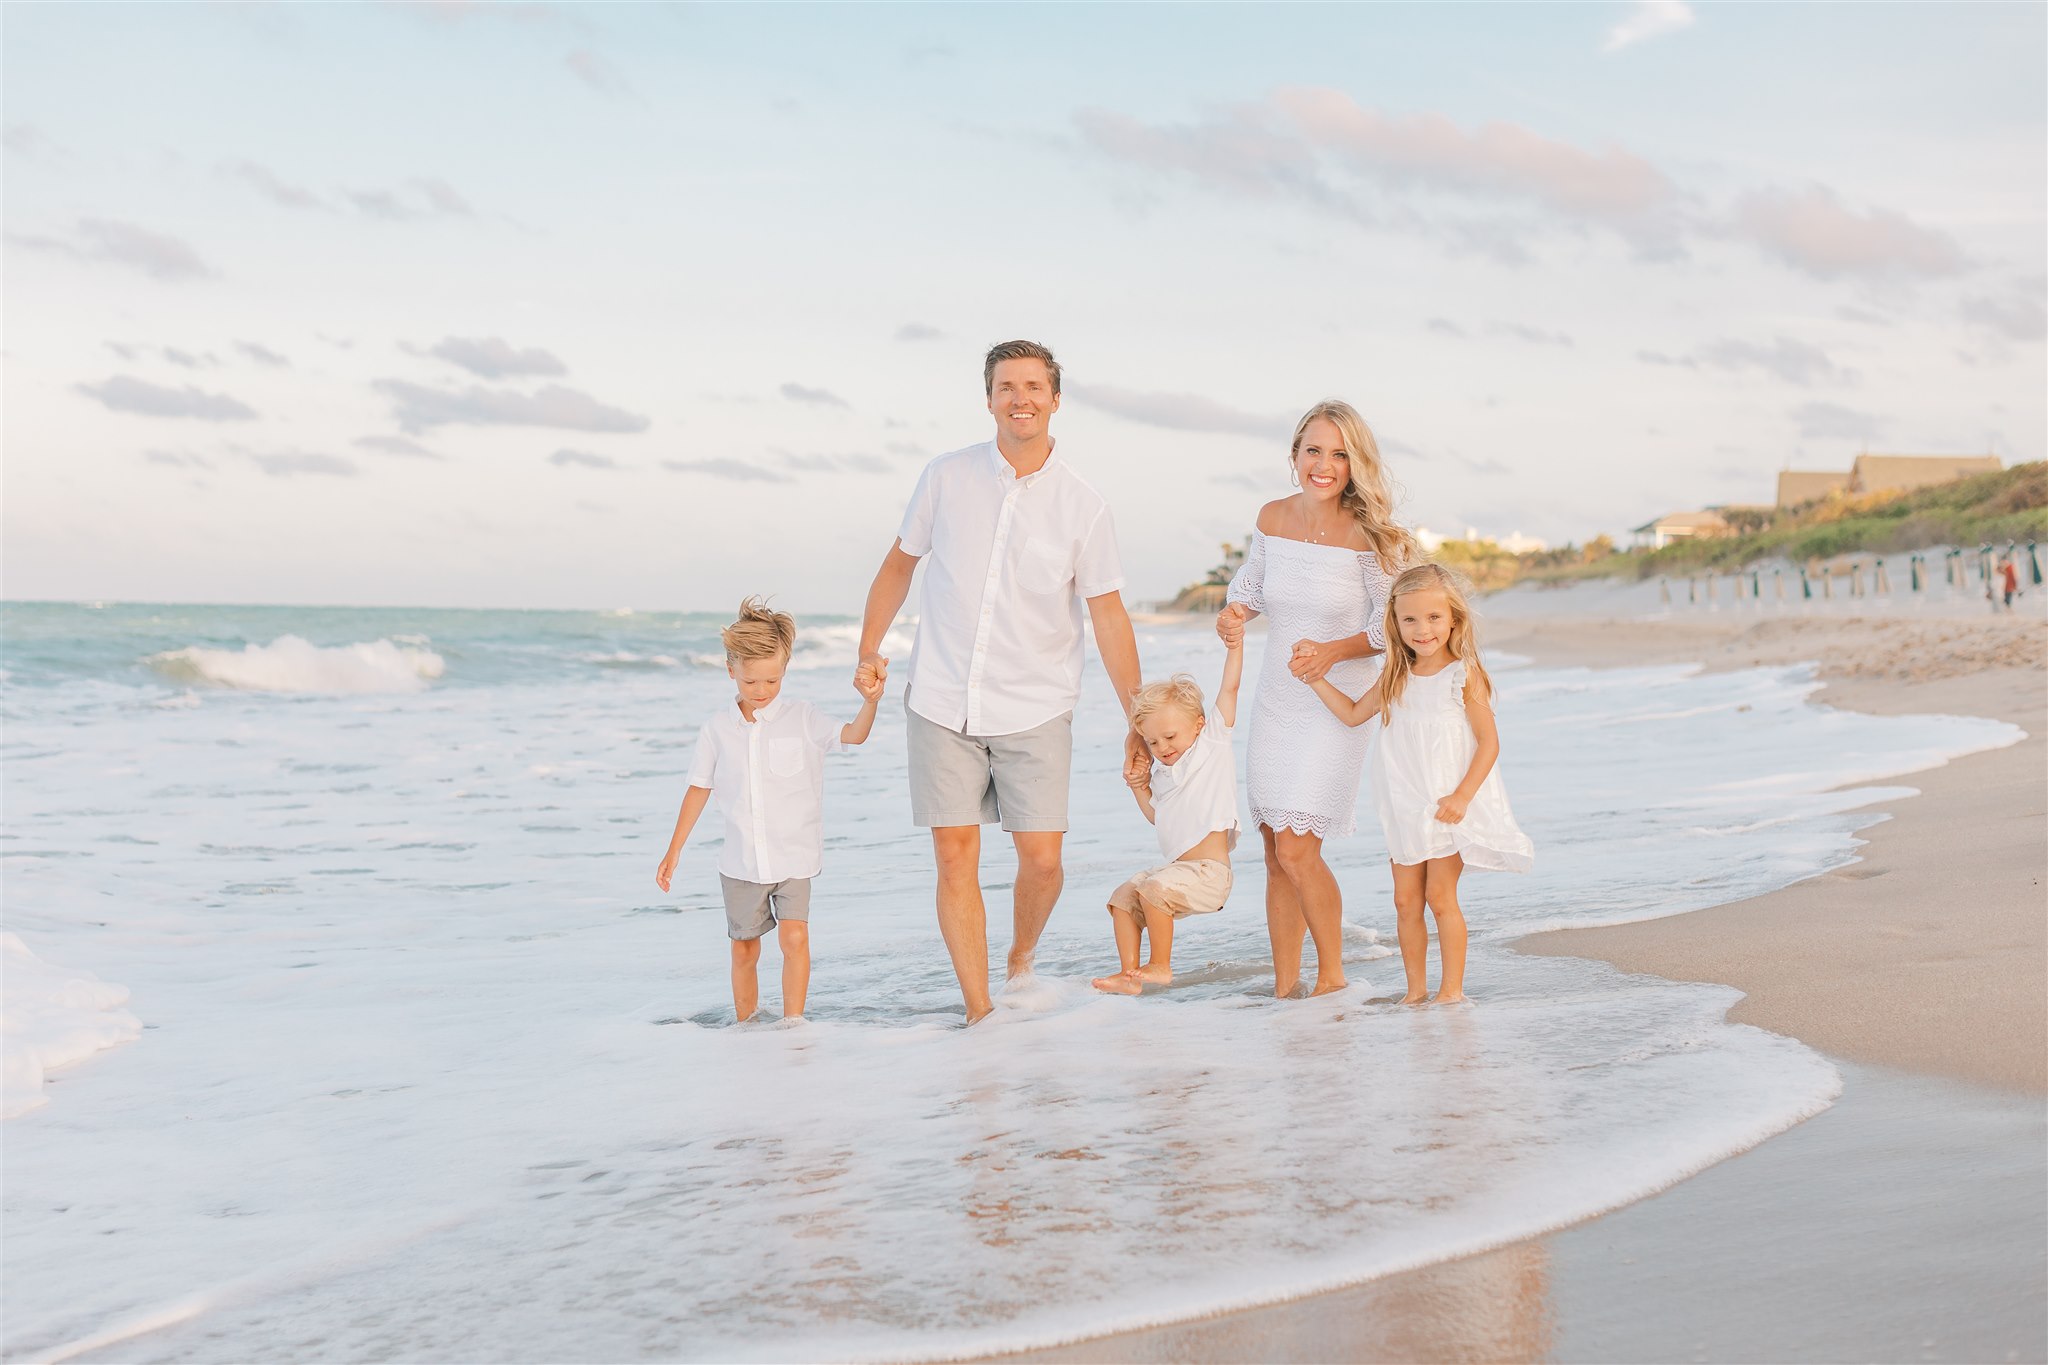 Sunset Beach Photoshoot for this Family of 4